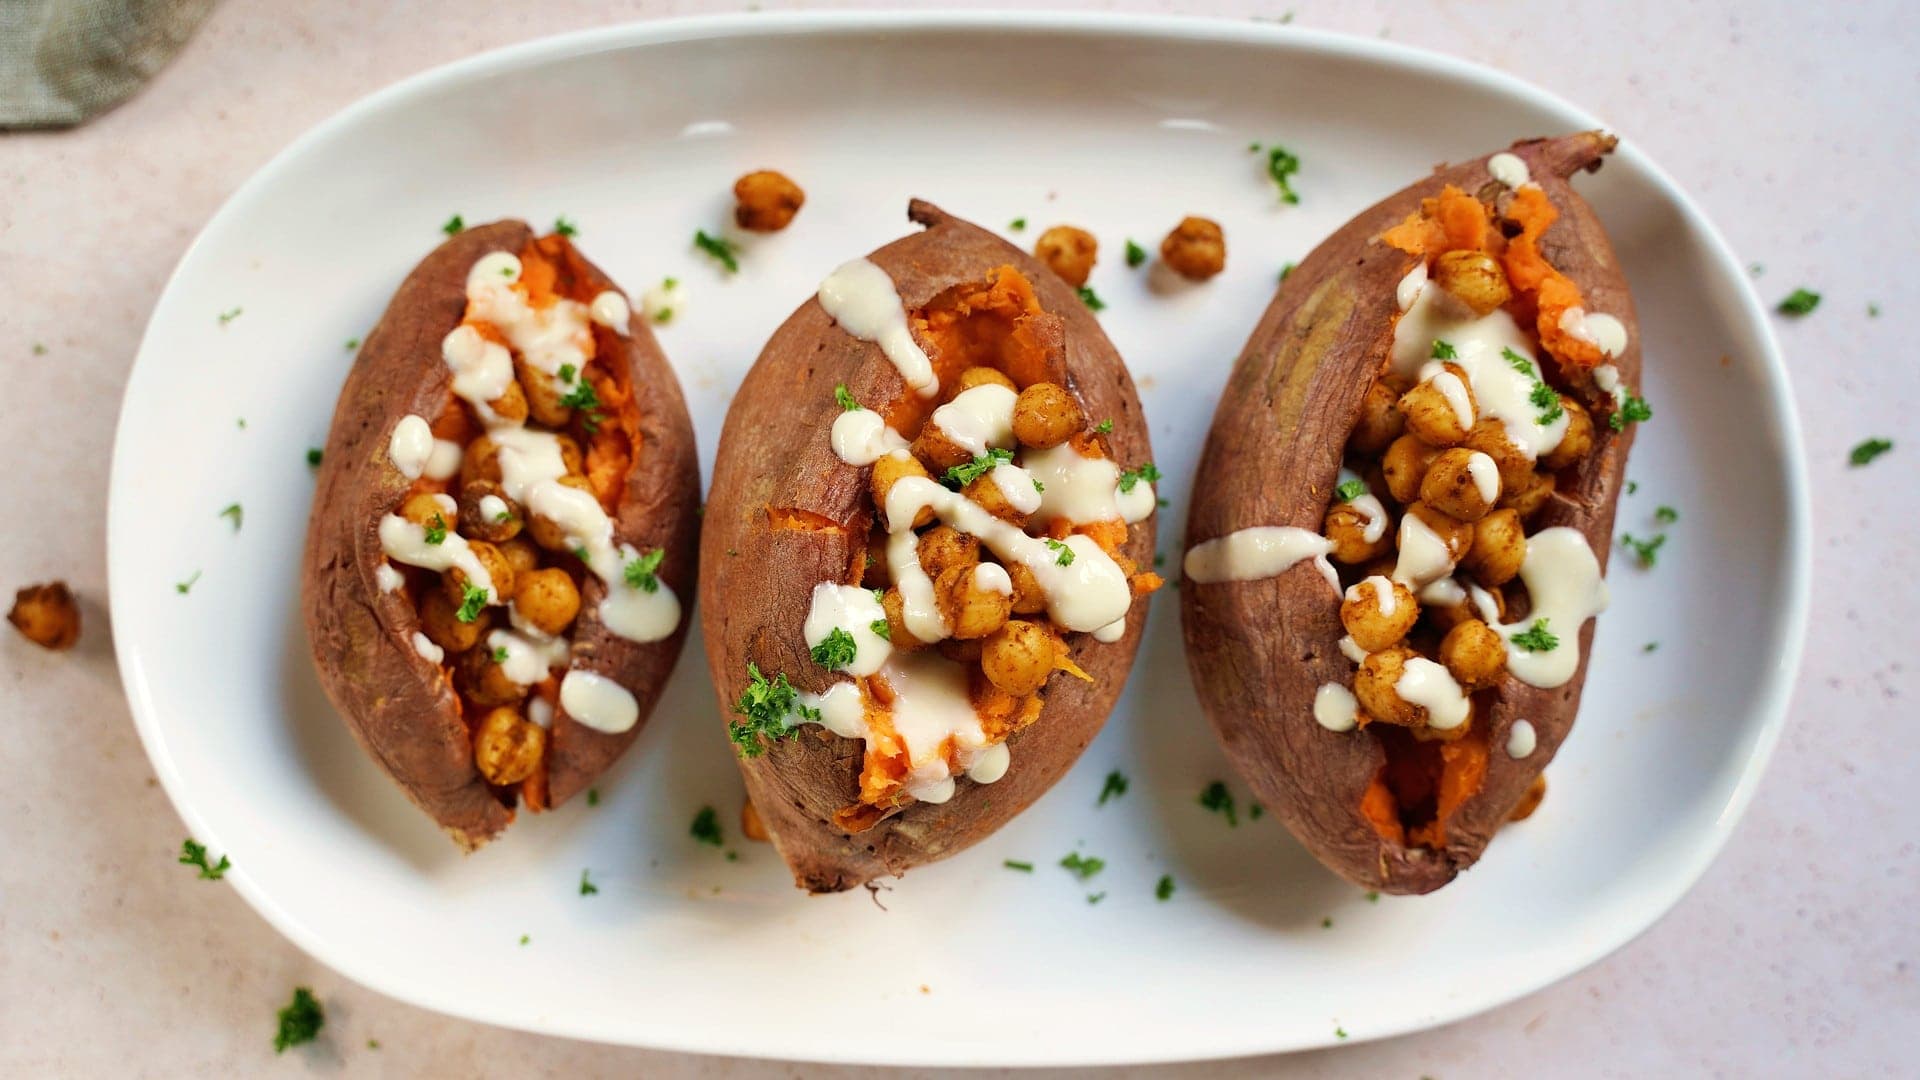 horizontal shot of 3 baked sweet potatoes on a white plate with roasted chickpeas and white sauce